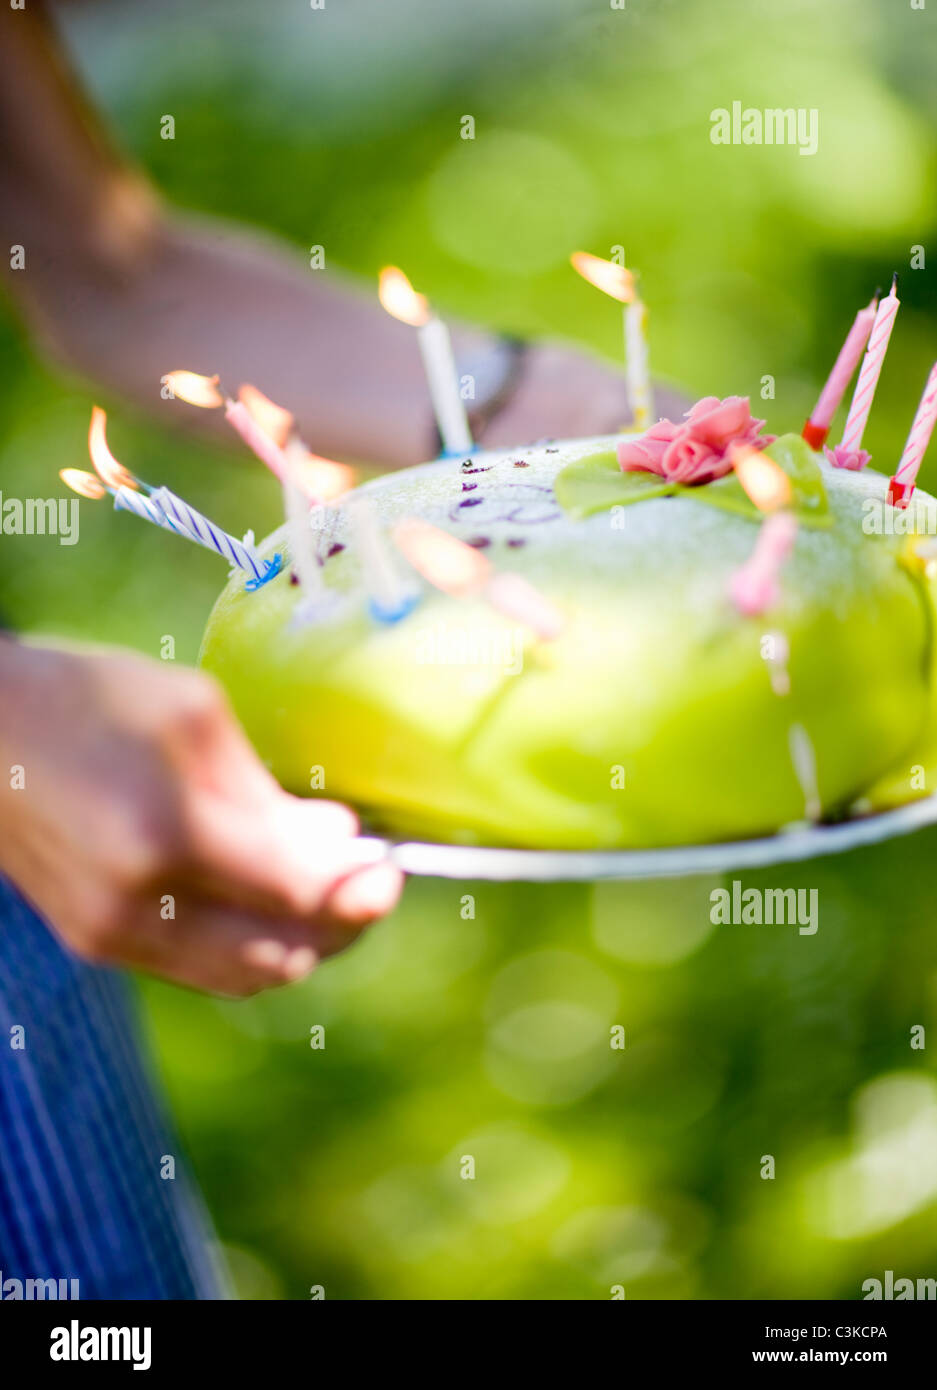 Woman holding birthday cake with lit candles, close-up Stock Photo